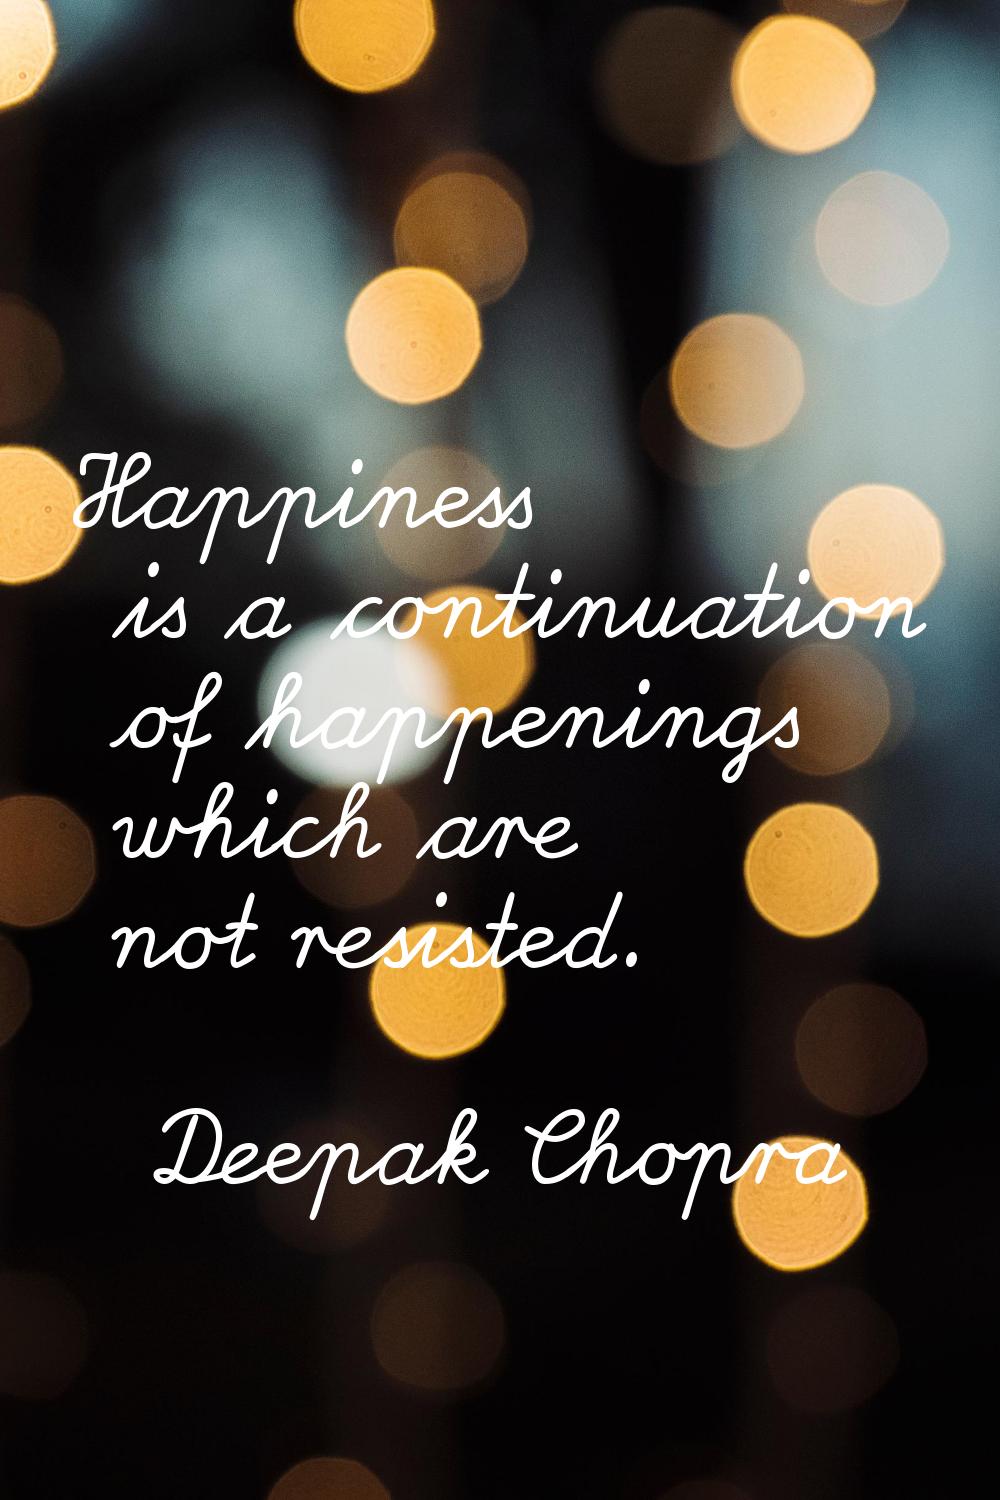 Happiness is a continuation of happenings which are not resisted.